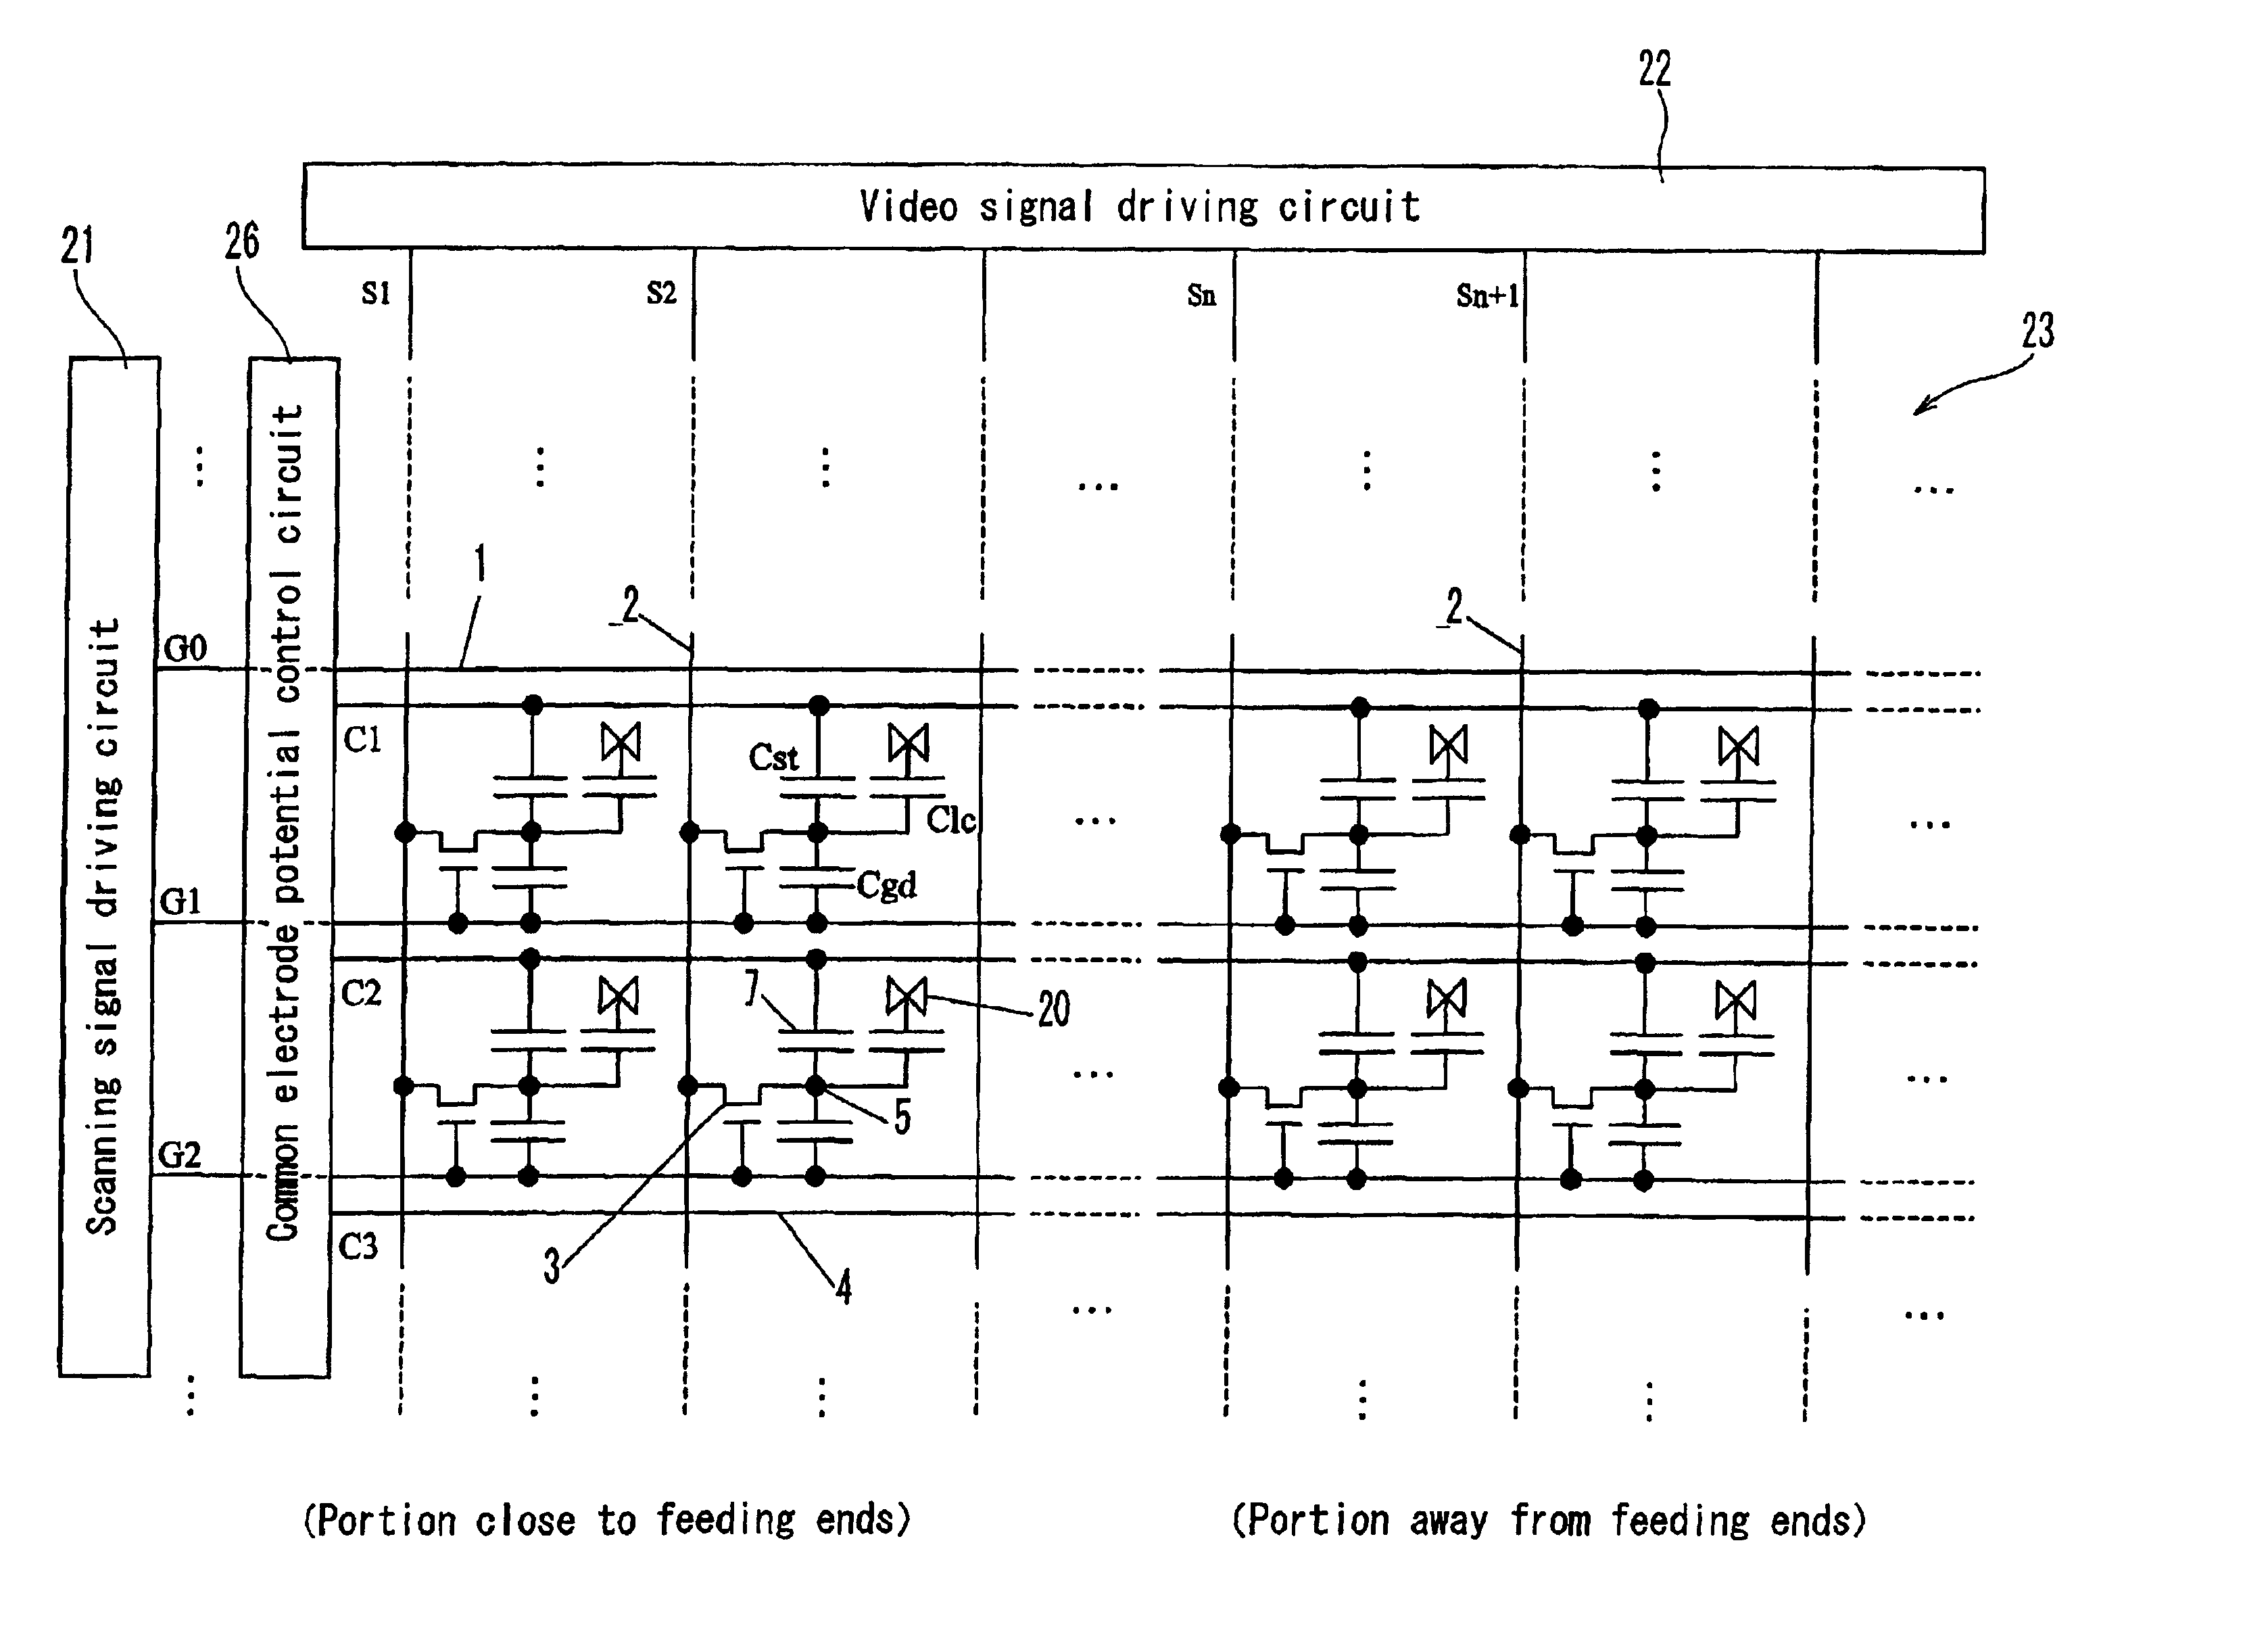 Active matrix type display apparatus method for driving the same, and display element